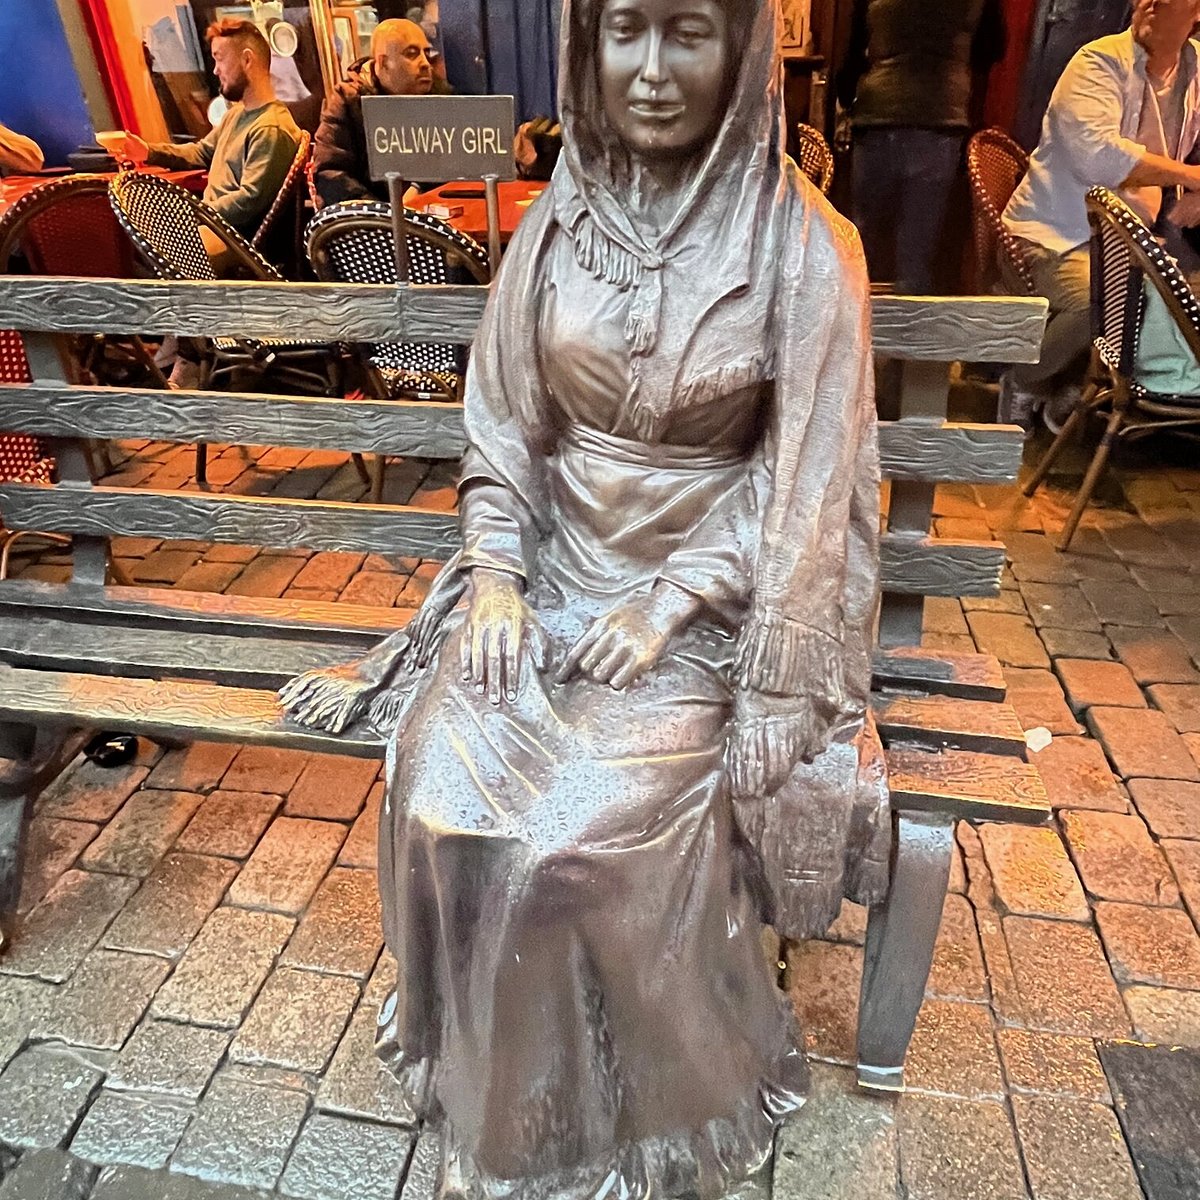 galway-girl-statue-all-you-need-to-know-before-you-go